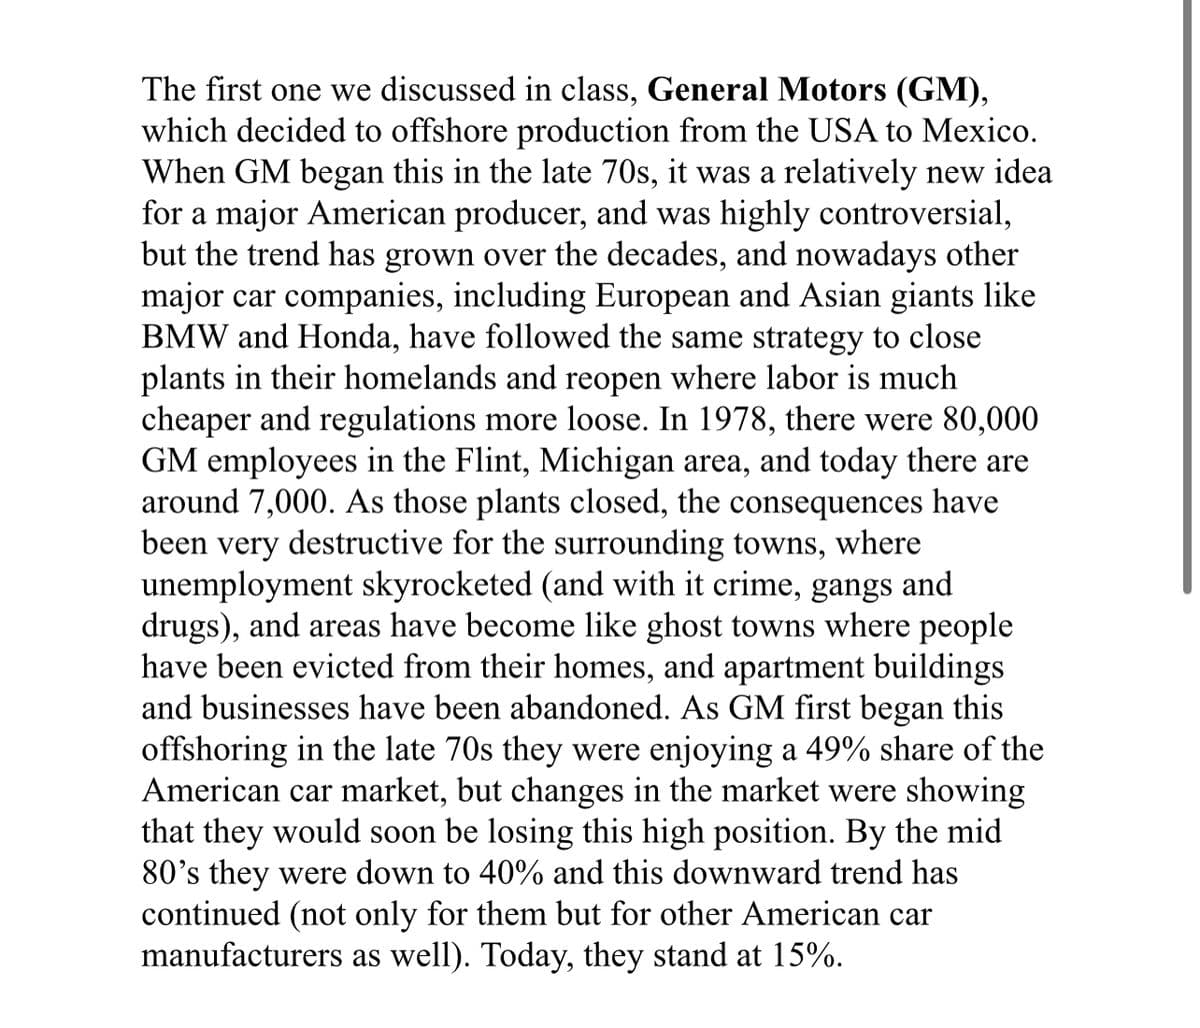 The first one we discussed in class, General Motors (GM),
which decided to offshore production from the USA to Mexico.
When GM began this in the late 70s, it was a relatively new idea
for a major American producer, and was highly controversial,
but the trend has grown over the decades, and nowadays other
major car companies, including European and Asian giants like
BMW and Honda, have followed the same strategy to close
plants in their homelands and reopen where labor is much
cheaper and regulations more loose. In 1978, there were 80,000
GM employees in the Flint, Michigan area, and today there are
around 7,000. As those plants closed, the consequences have
been very destructive for the surrounding towns, where
unemployment skyrocketed (and with it crime, gangs and
drugs), and areas have become like ghost towns where people
have been evicted from their homes, and apartment buildings
and businesses have been abandoned. As GM first began this
offshoring in the late 70s they were enjoying a 49% share of the
American car market, but changes in the market were showing
that they would soon be losing this high position. By the mid
80's they were down to 40% and this downward trend has
continued (not only for them but for other American car
manufacturers as well). Today, they stand at 15%.
